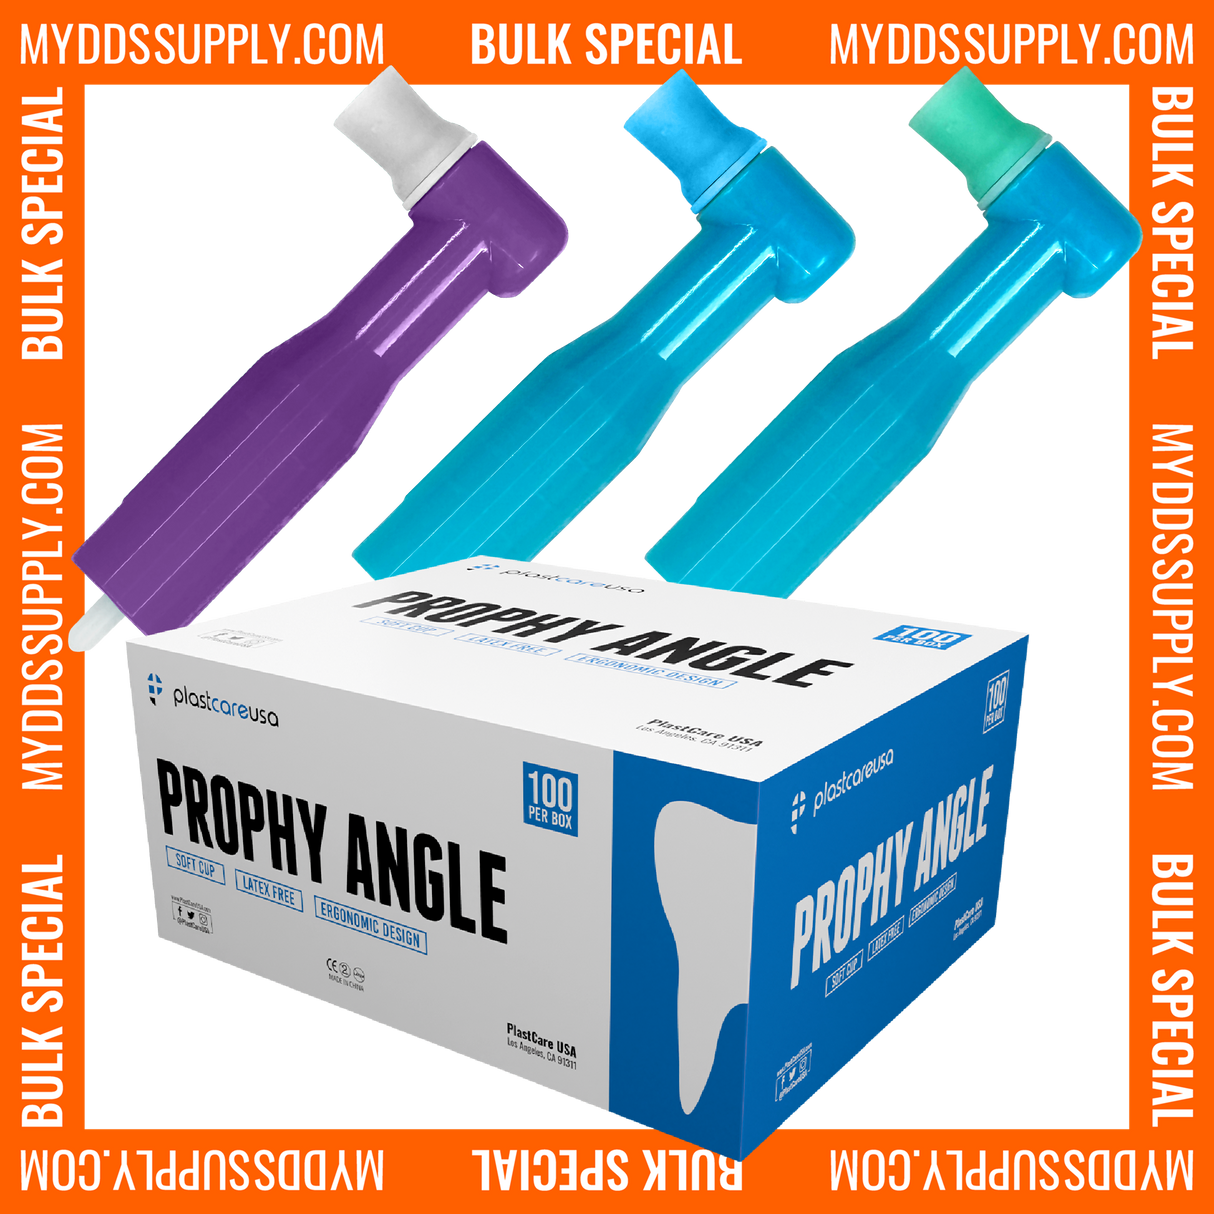 2000 Prophy Angles Soft Cup, Disposable & Latex Free, (20 Boxes of 100) *Bulk Special*